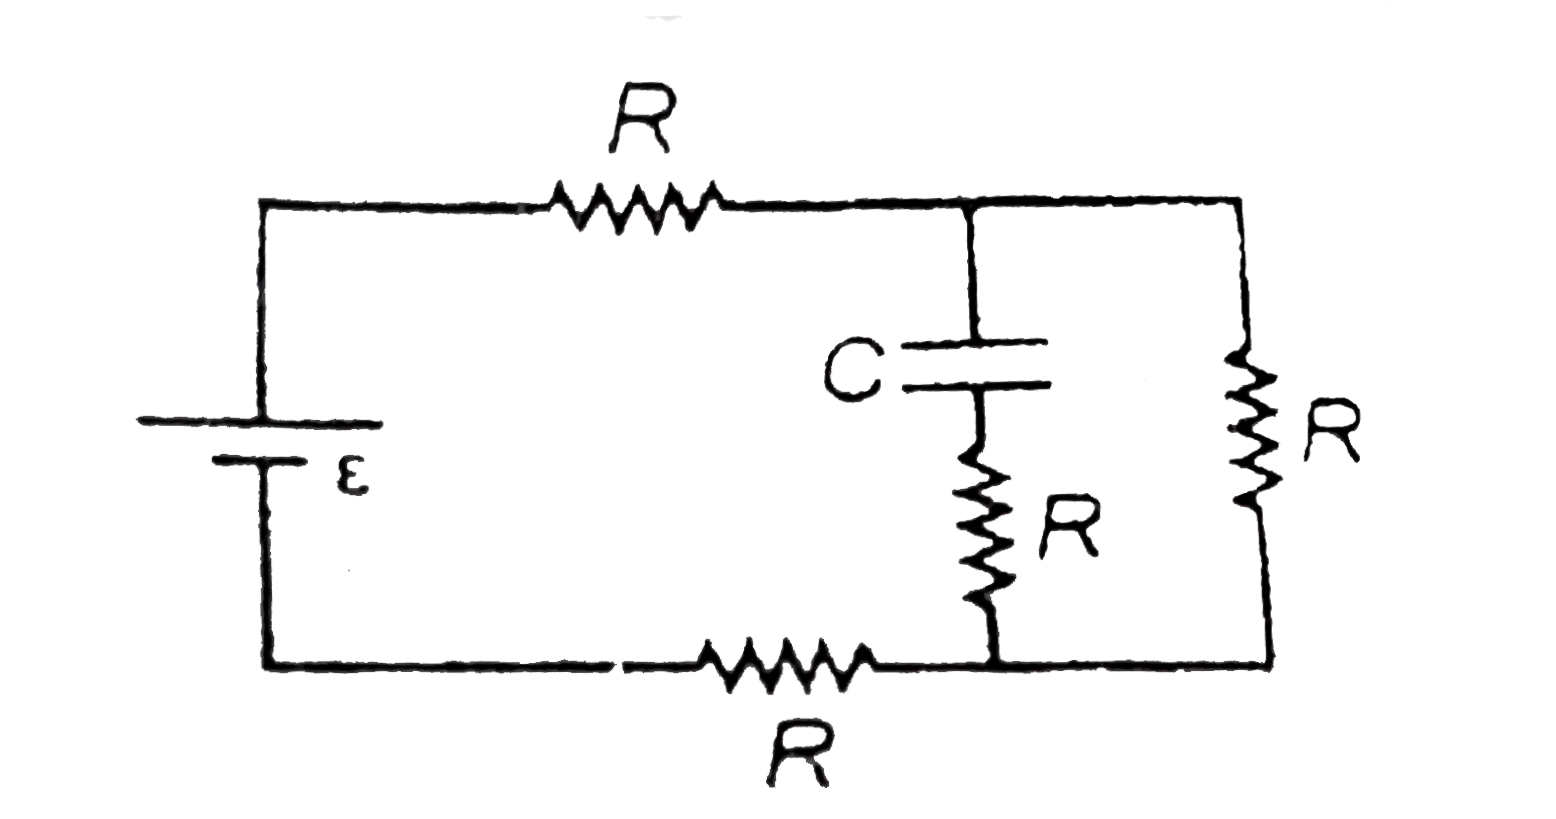 The time constant of the circuit shown in the figure is